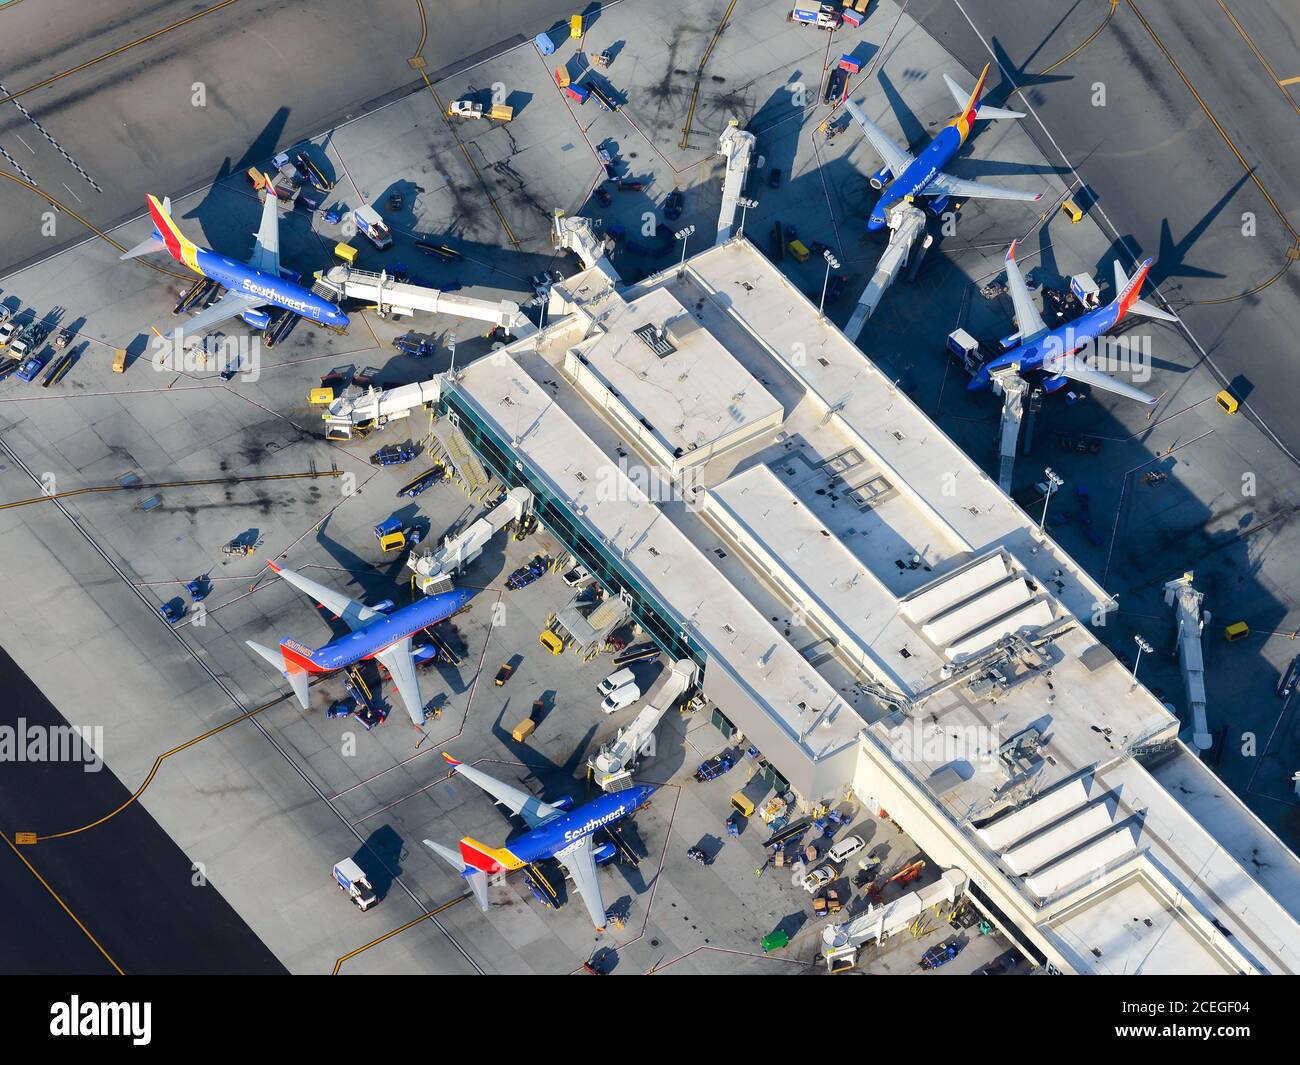 Southwest Airlines Terminal 1 at Los Angeles International Airport, United States. Southwest Airlines Boeing 737 parked at LAX Airport T1. Stock Photo